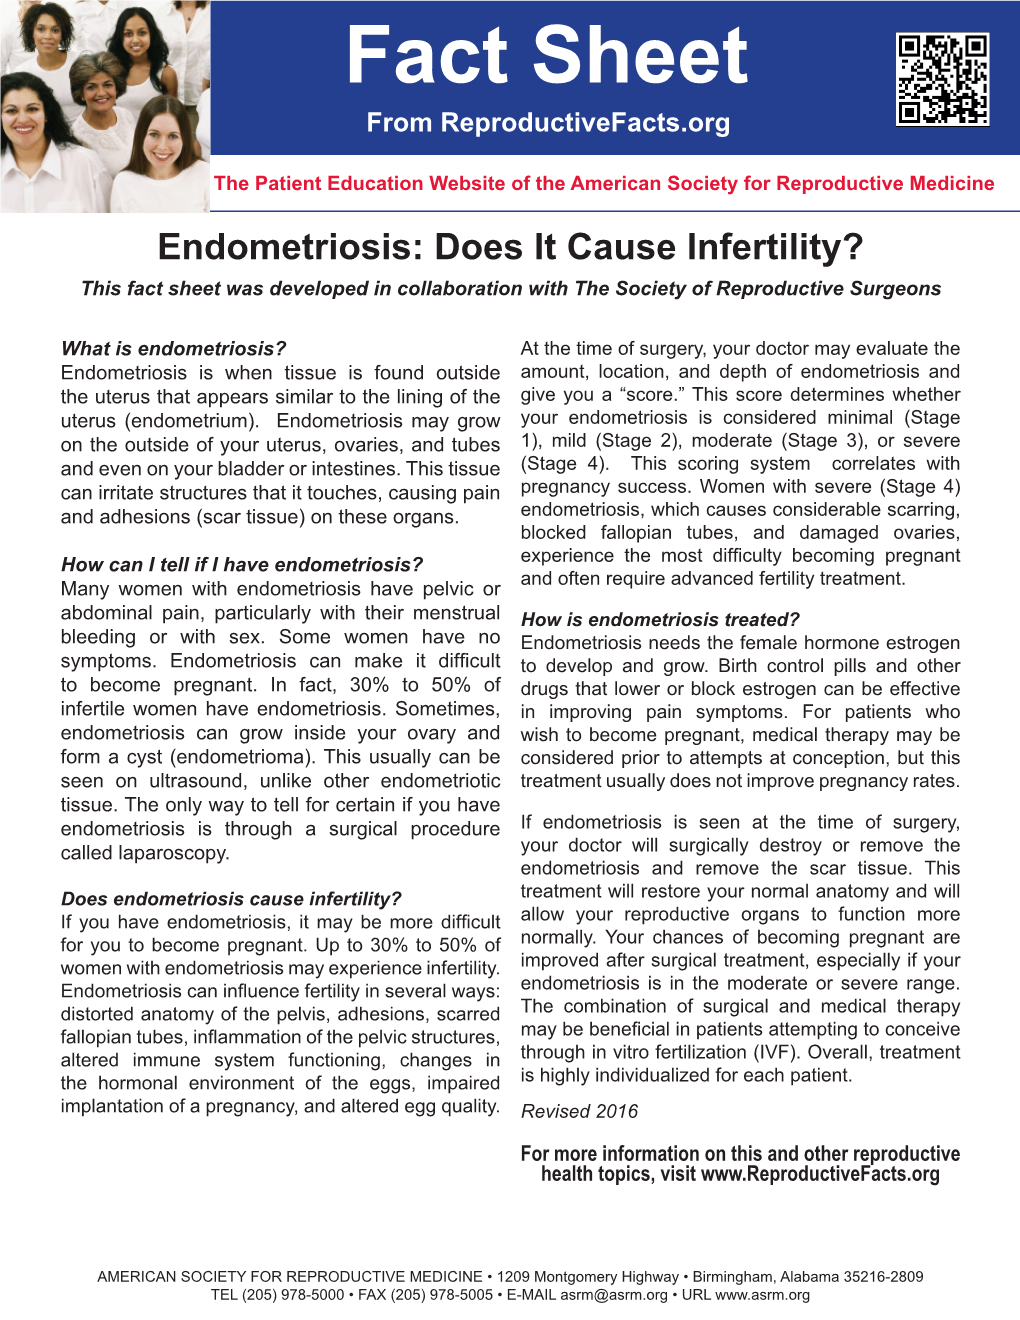 Endometriosis: Does It Cause Infertility? This Fact Sheet Was Developed in Collaboration with the Society of Reproductive Surgeons